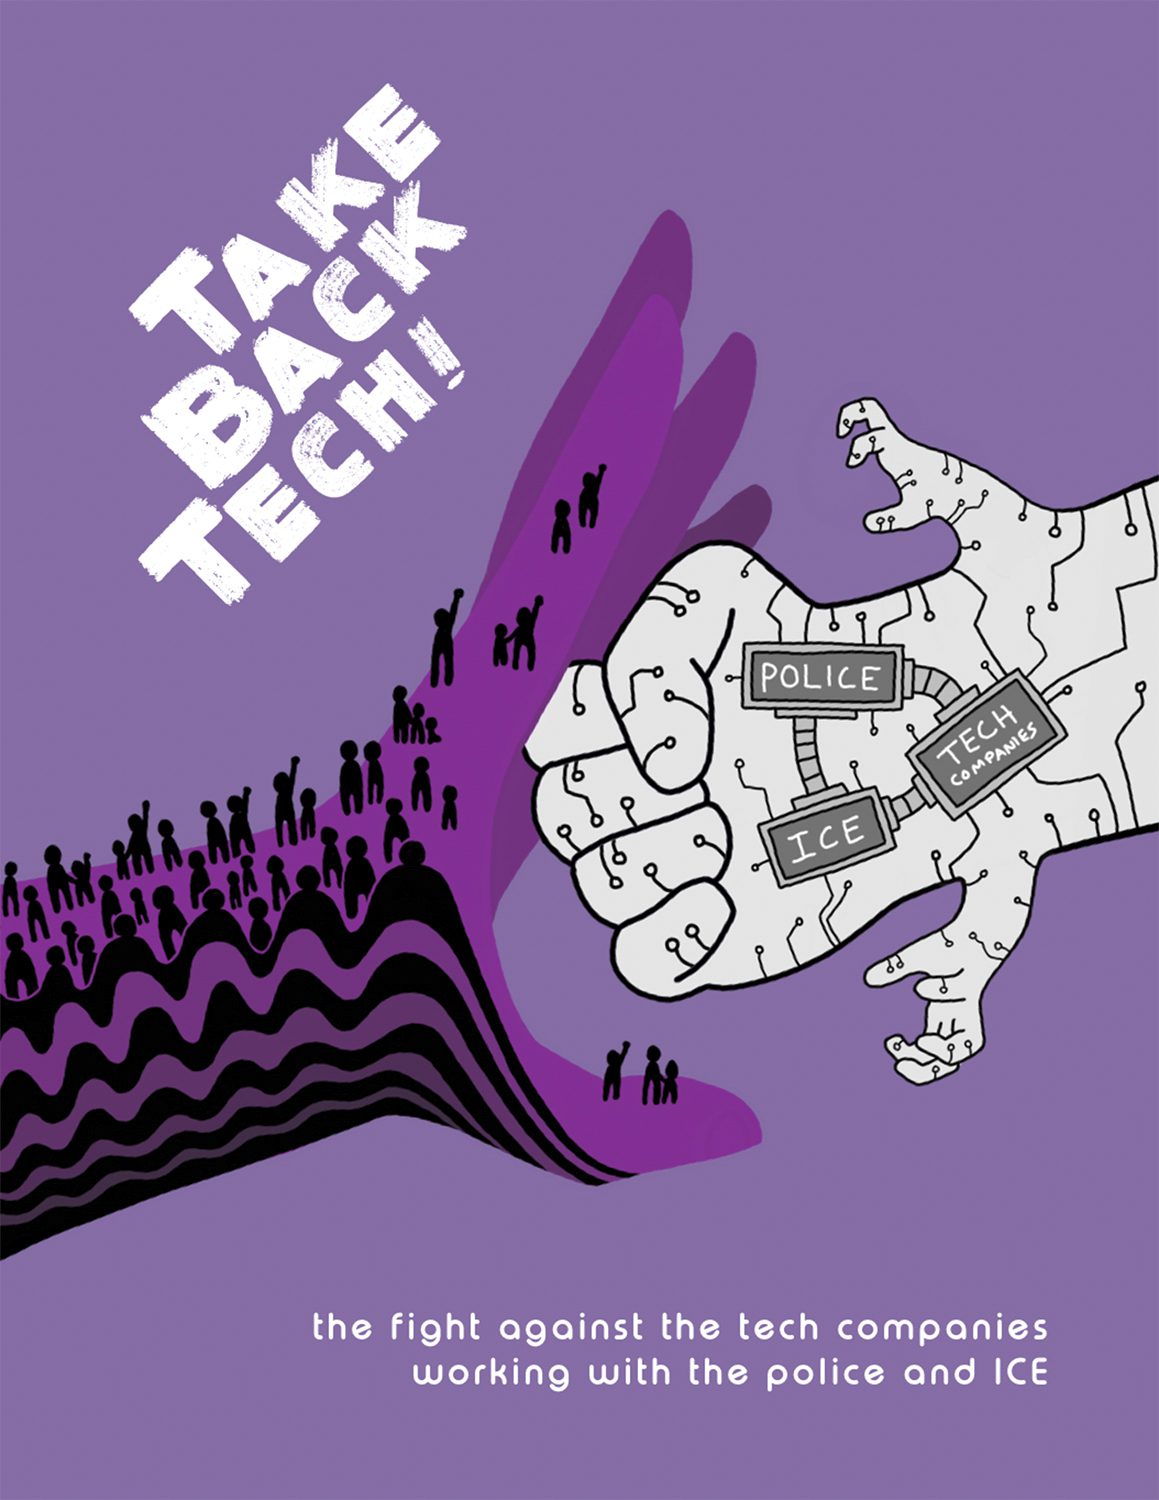 "Take back tech!" "The fight against the tech companies working with the police and ICE"